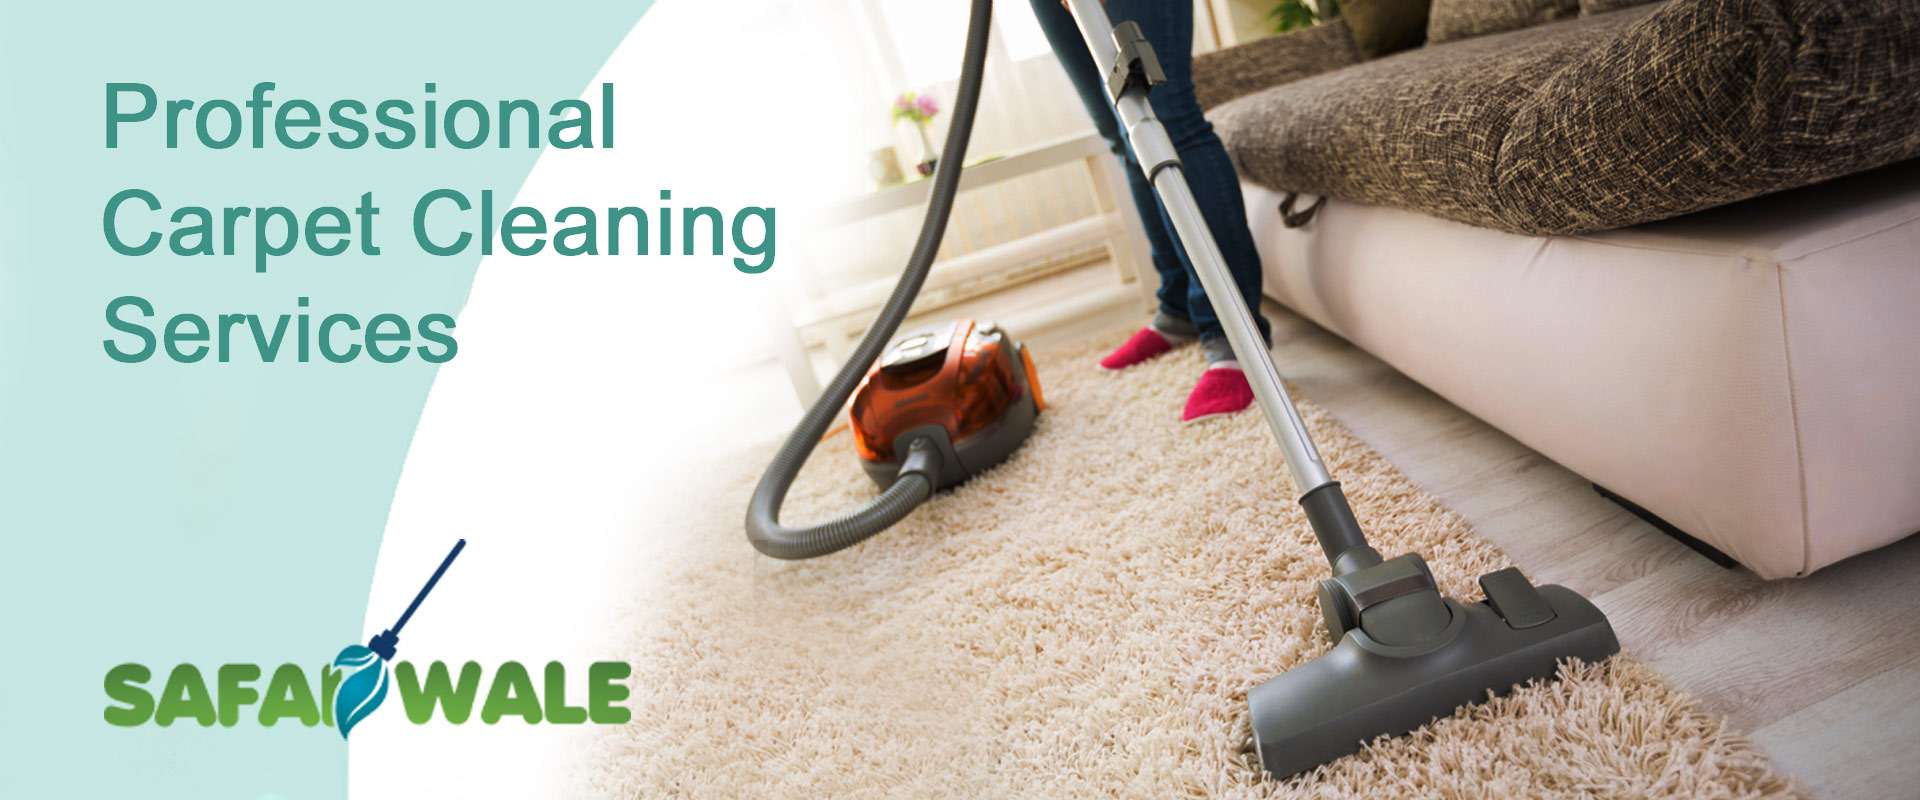 Carpet Cleaning Services In Ambernath, Thane